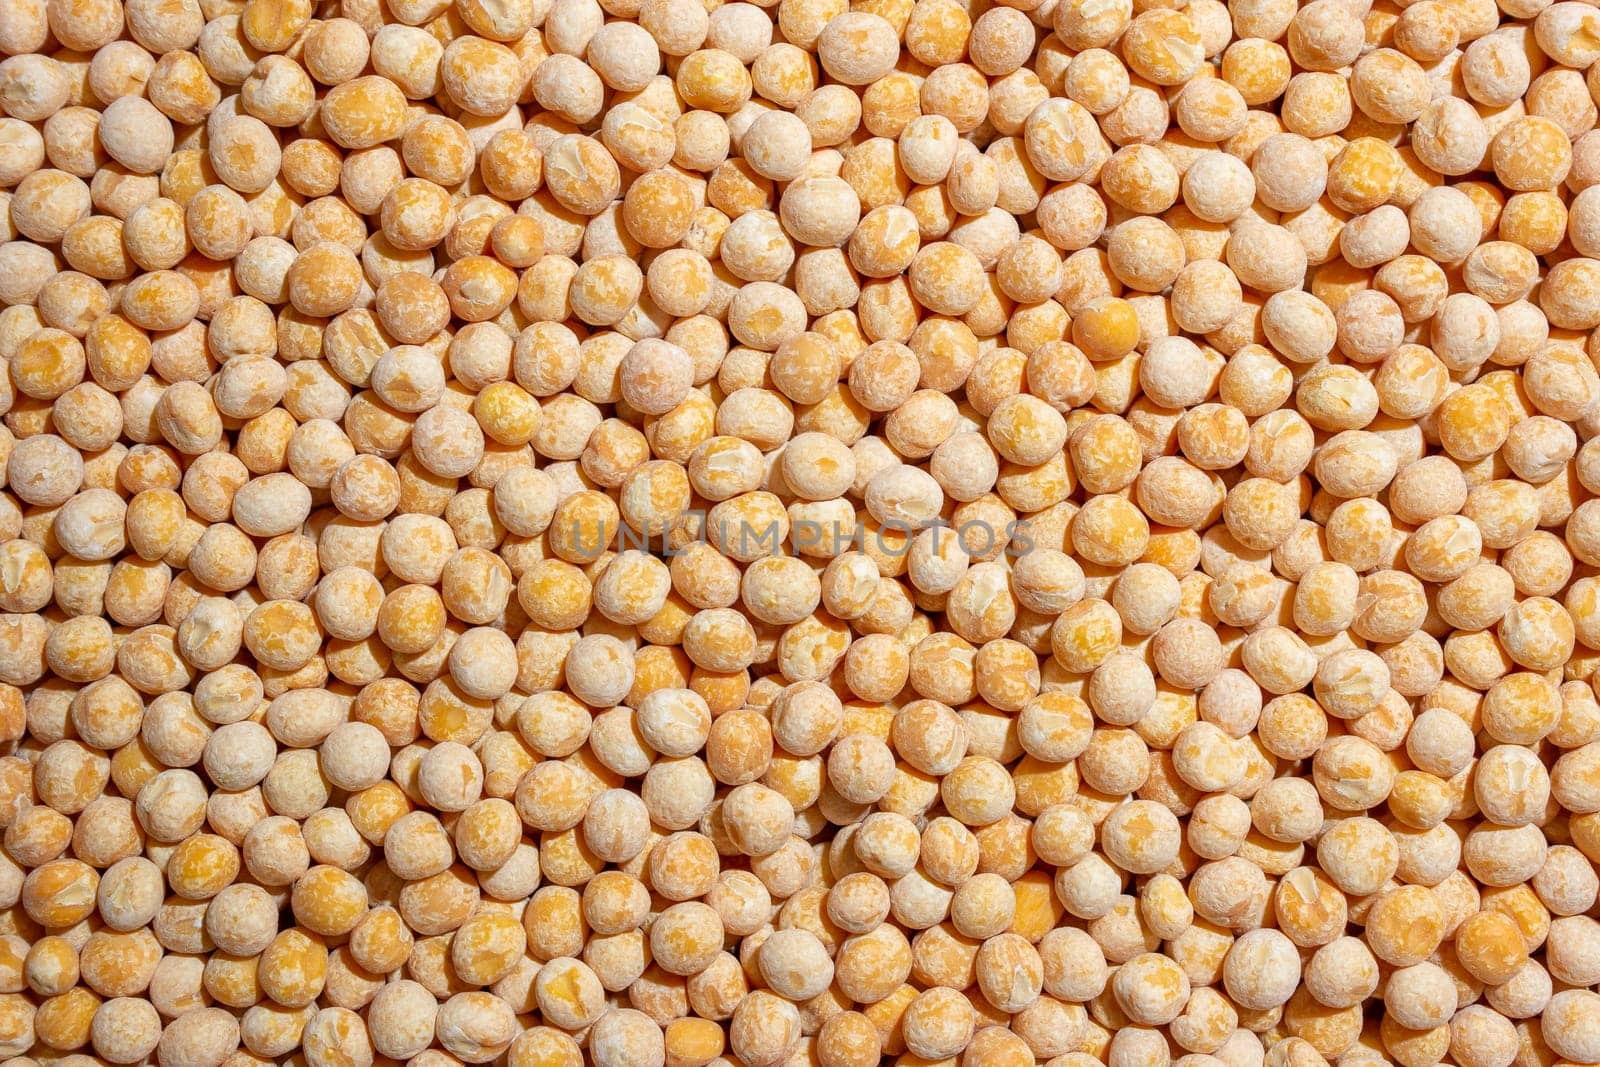 Uncooked Yellow Polished Peas Background by InfinitumProdux